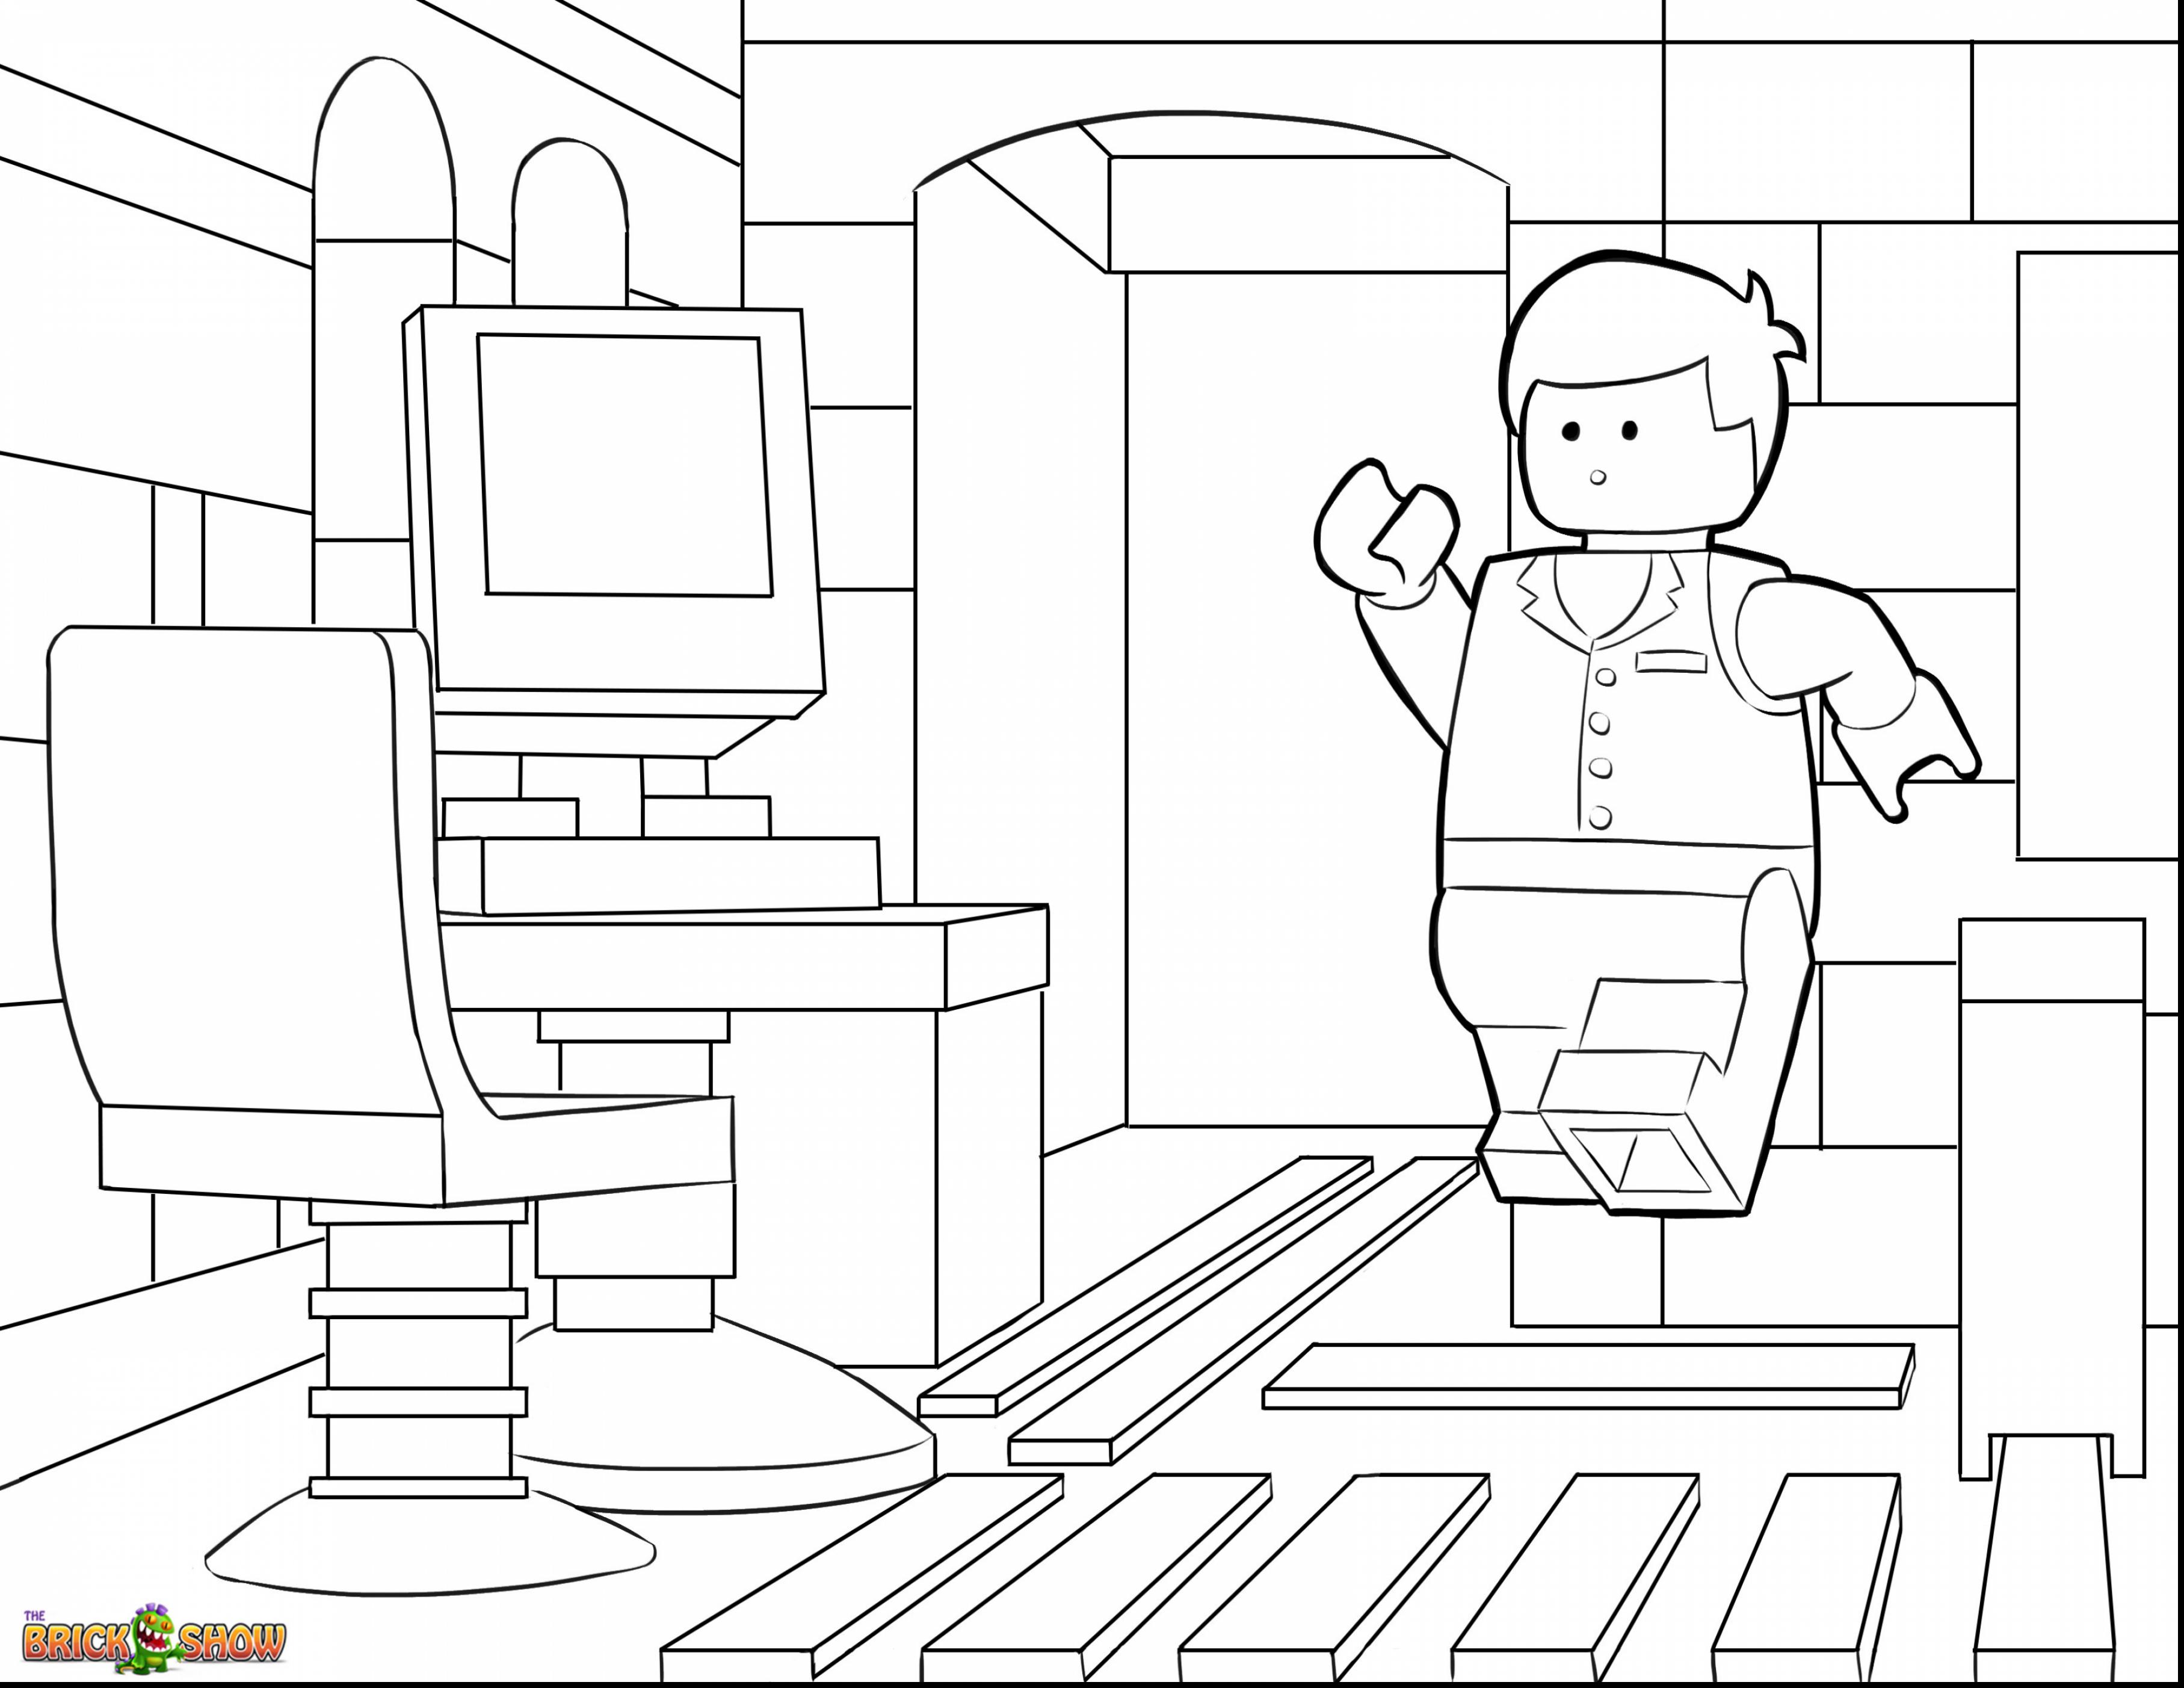 Lego Movie Coloring Pages at GetDrawings | Free download